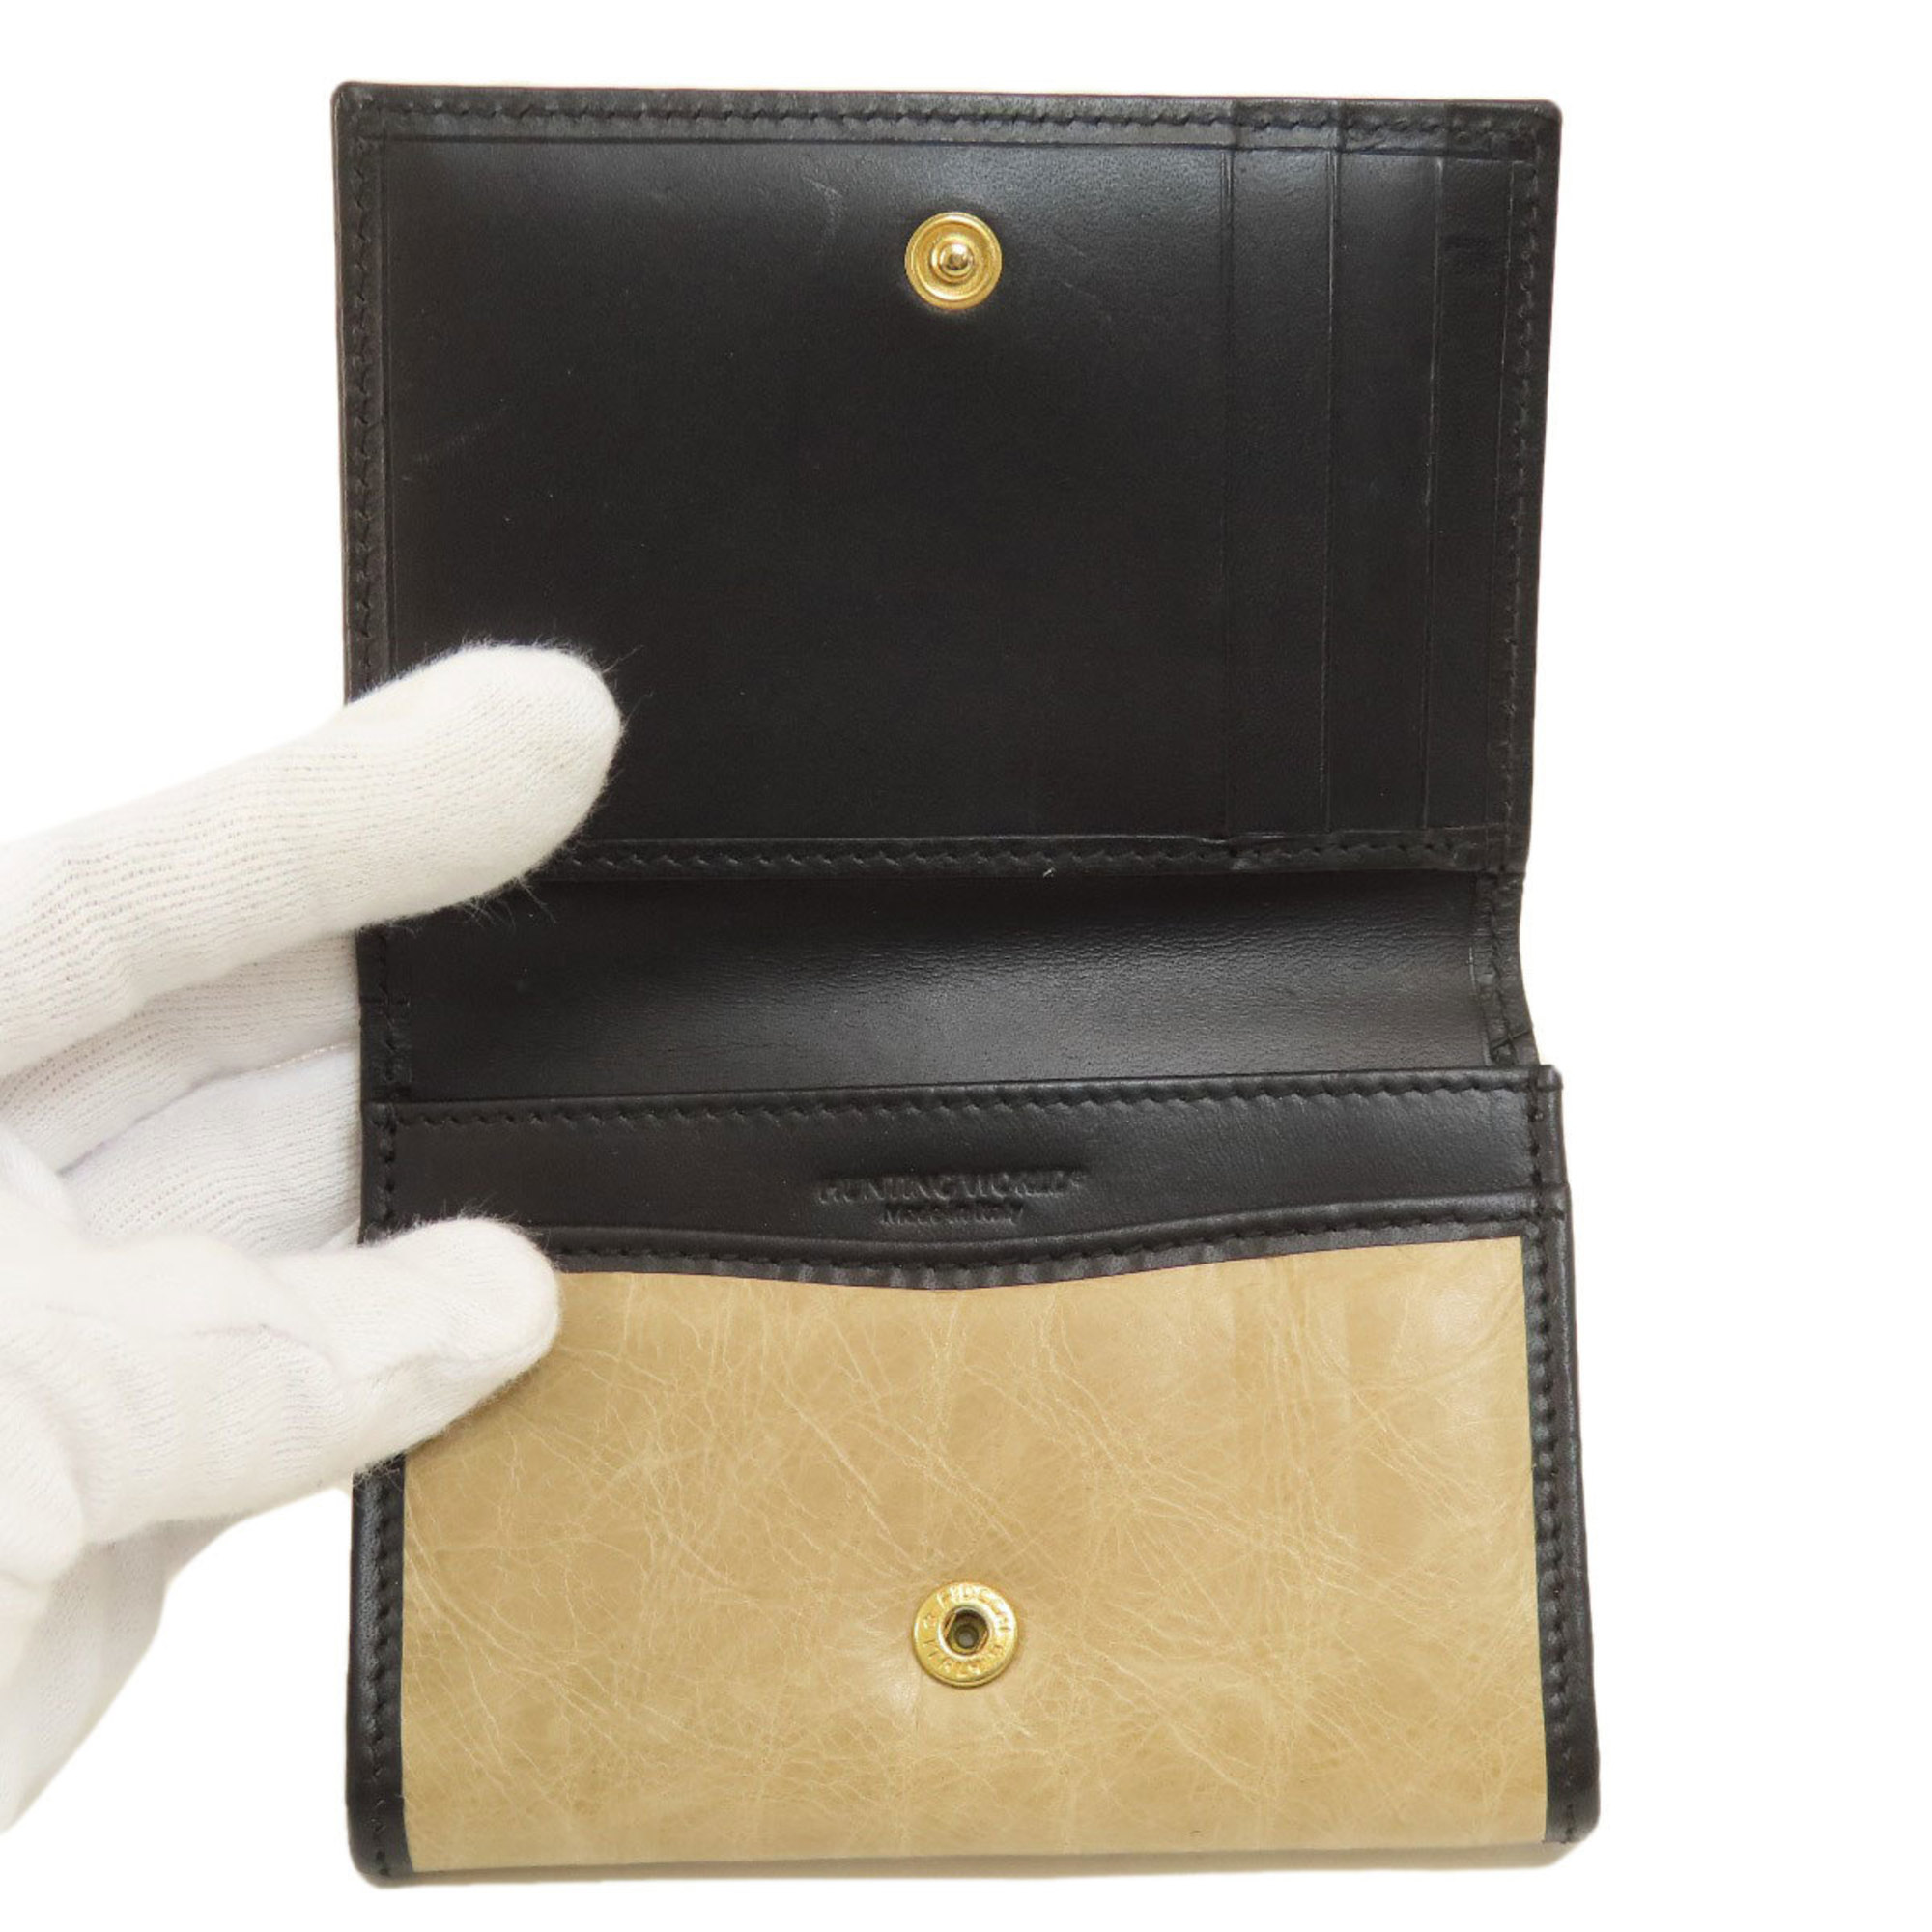 HUNTING WORLD Coin Case Leather Women's